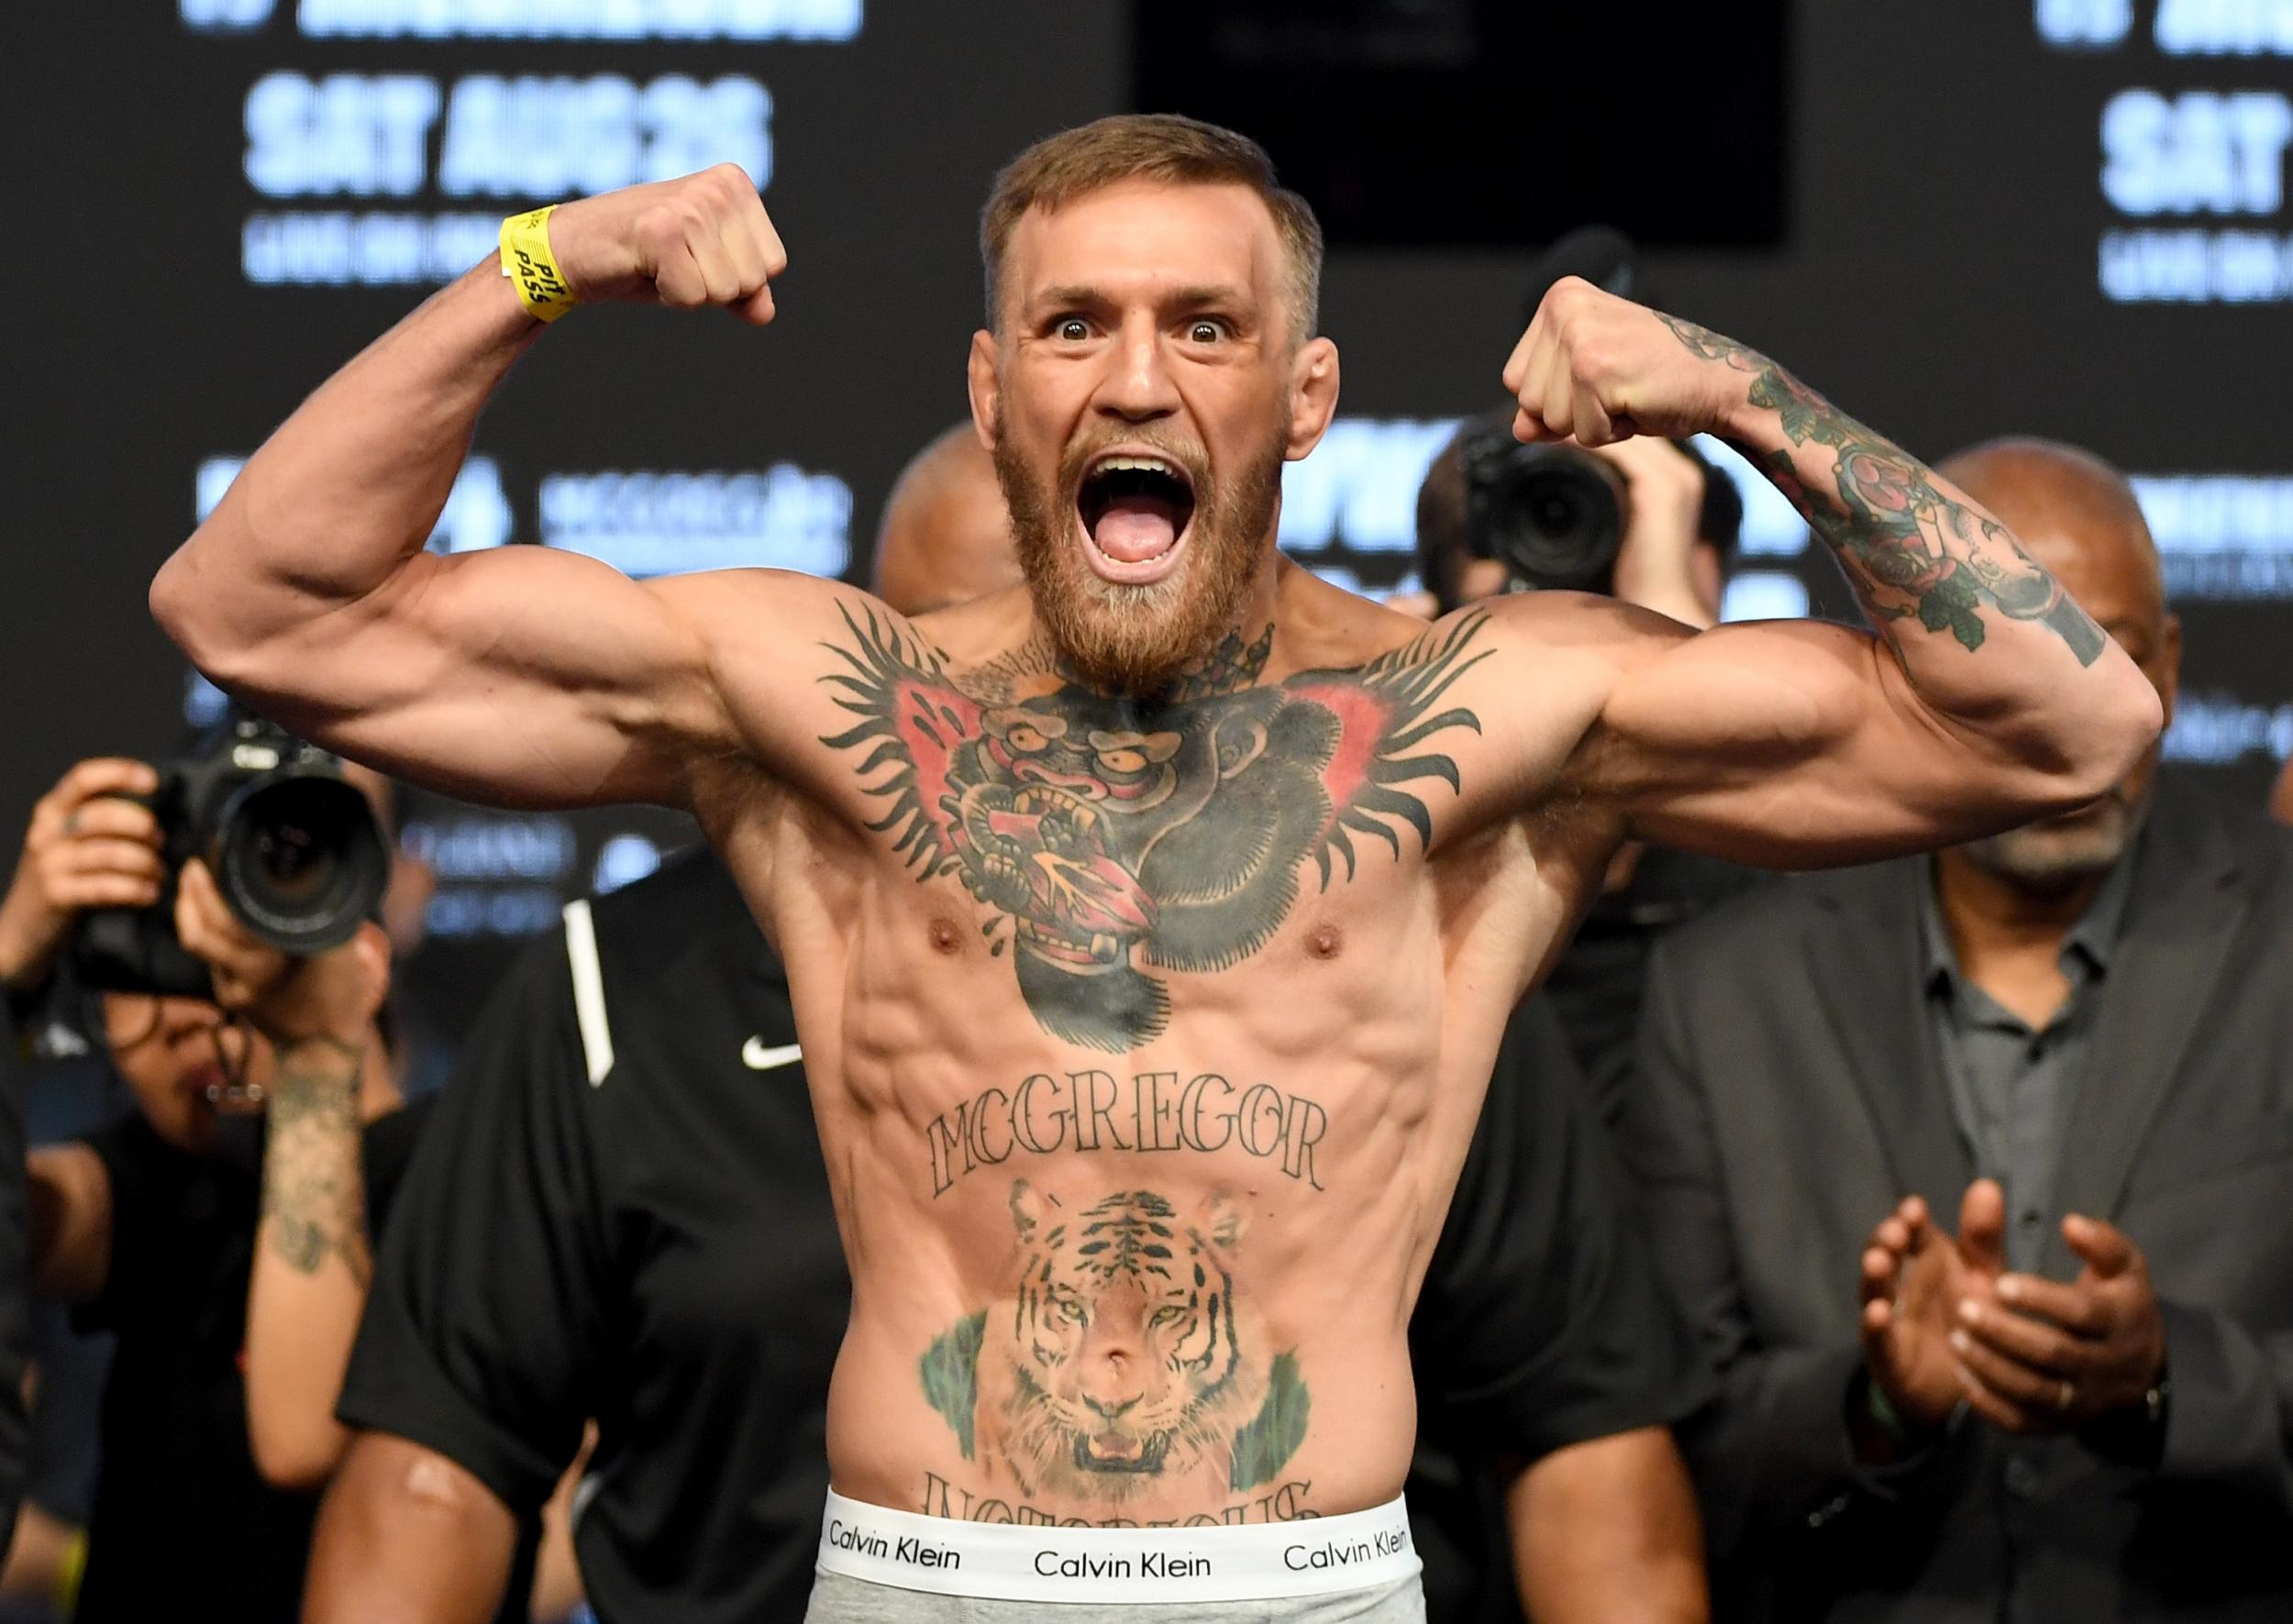 McGregor is already much larger than Mayweather